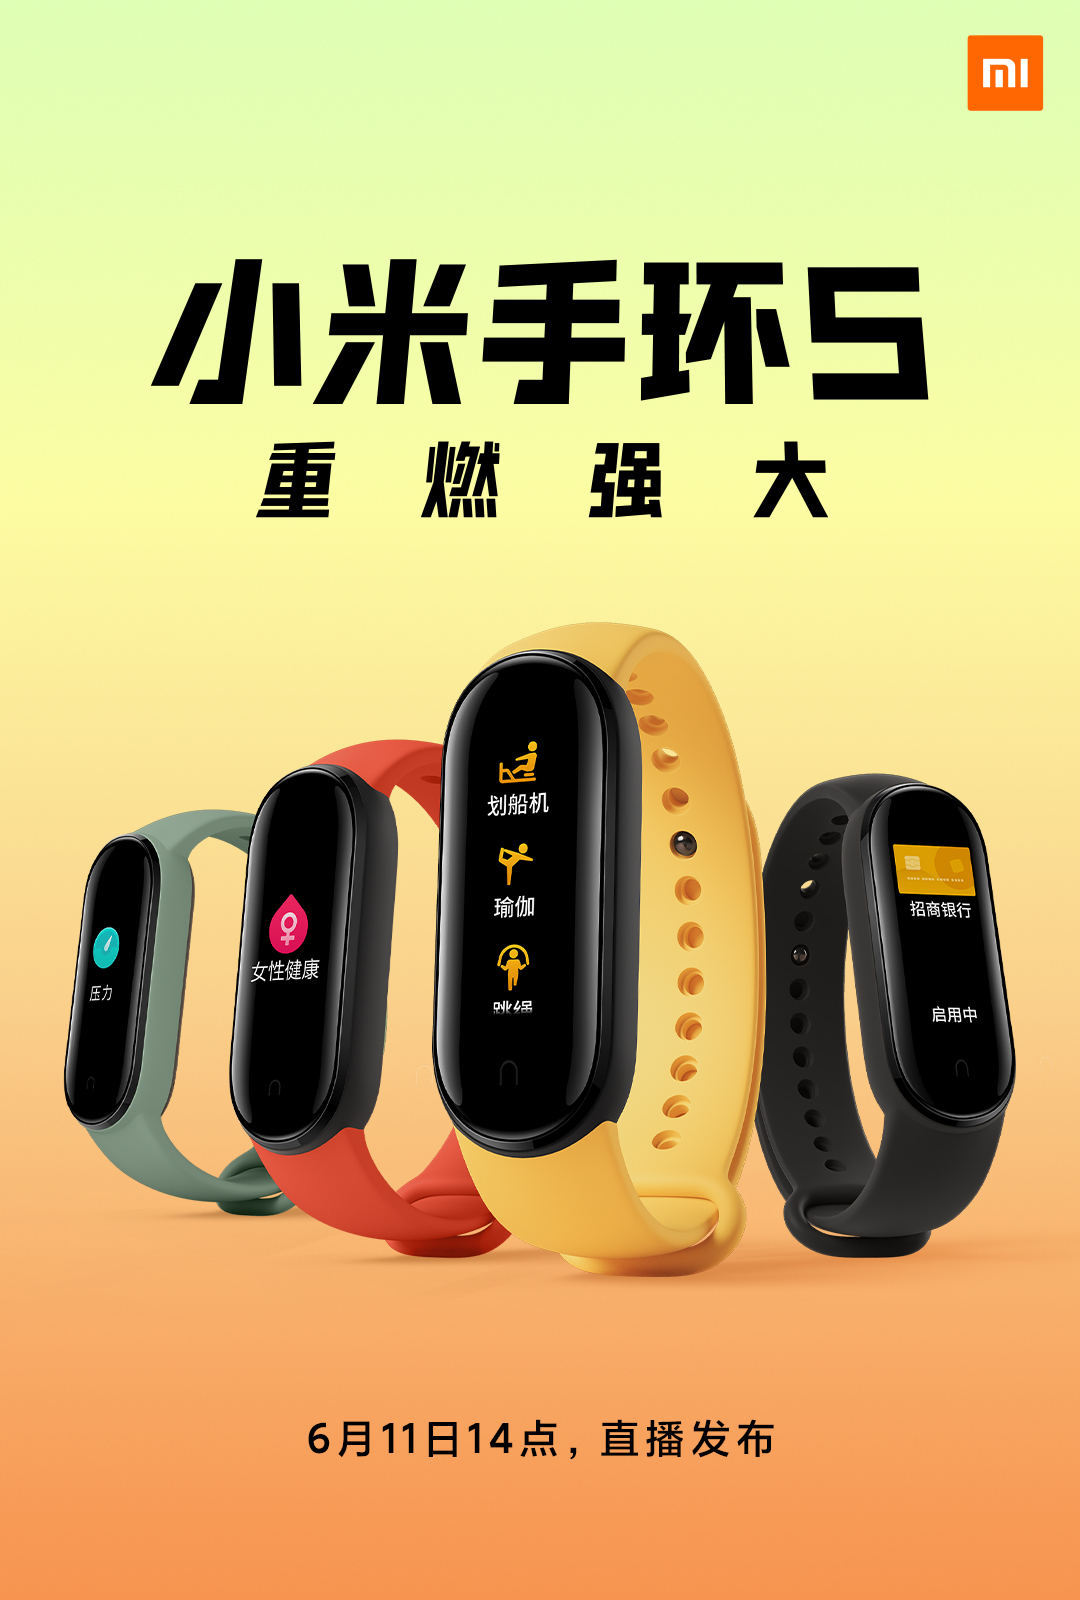 Xiaomi Mi Band 5 with Magnetic Charging: Here all information